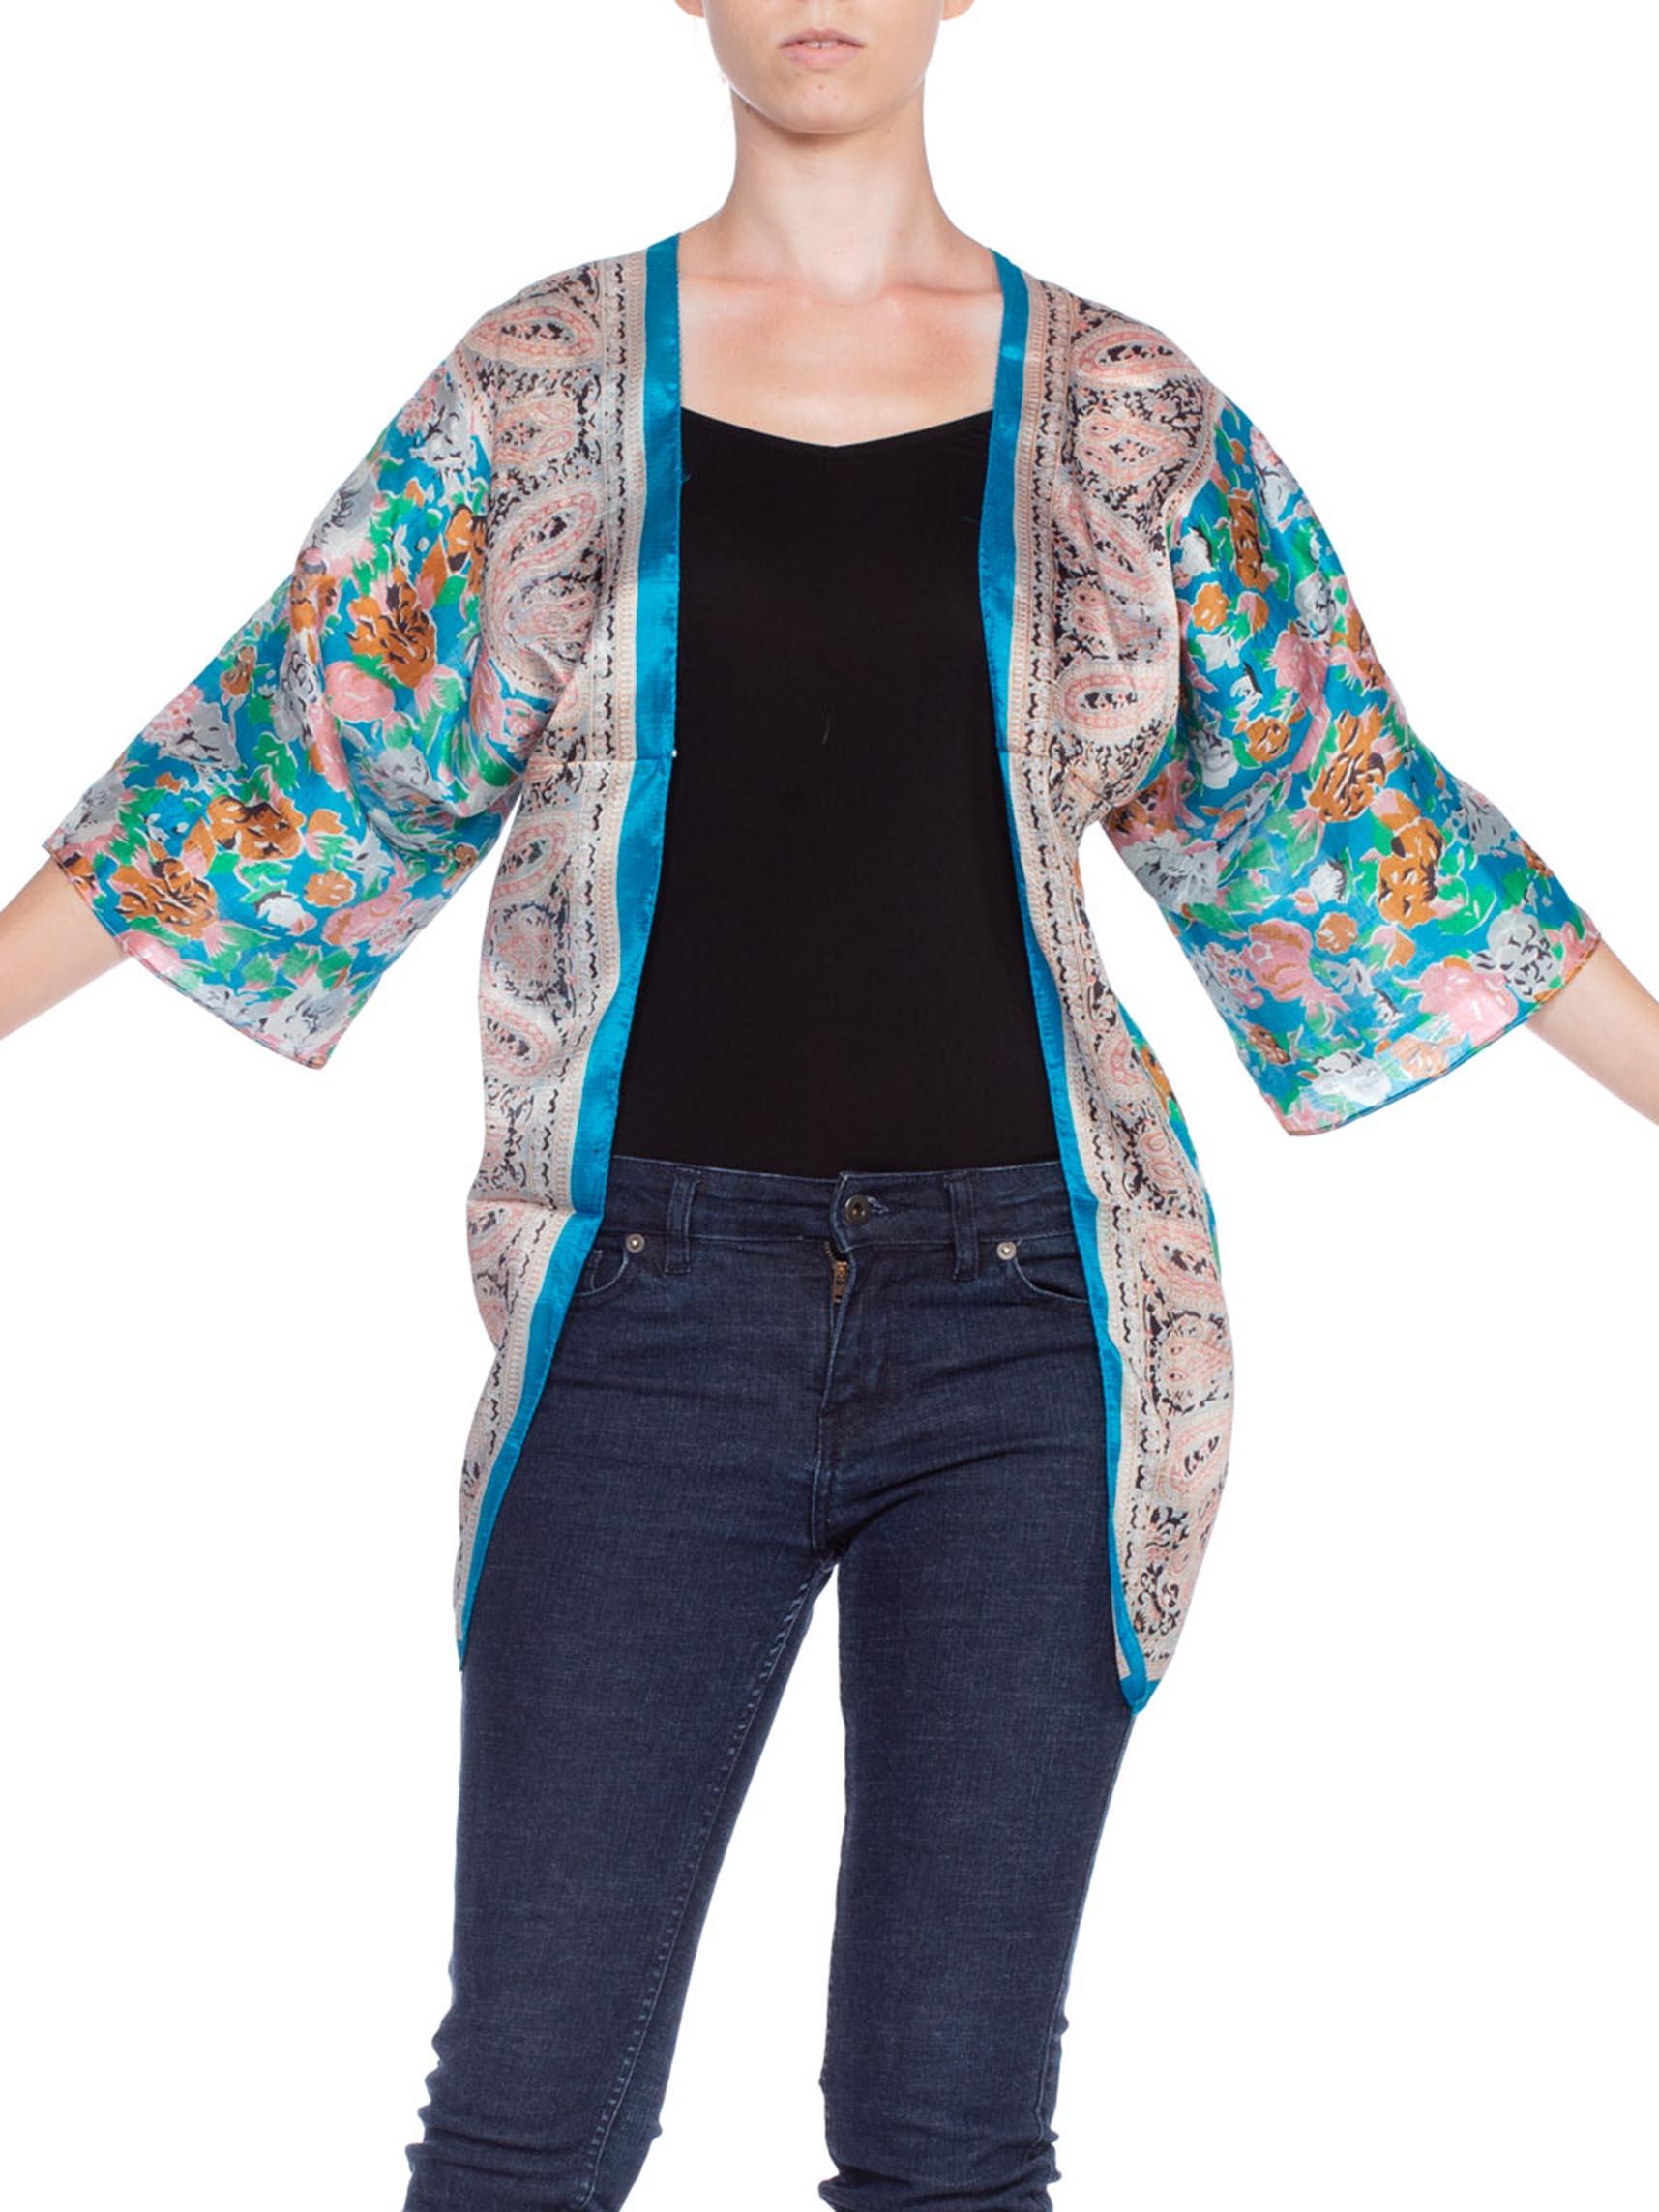 MORPHEW COLLECTION Blue & Green Hand Printed Silk Mini Kimono Jacket
MORPHEW COLLECTION is made entirely by hand in our NYC Ateliér of rare antique materials sourced from around the globe. Our sustainable vintage materials represent over a century